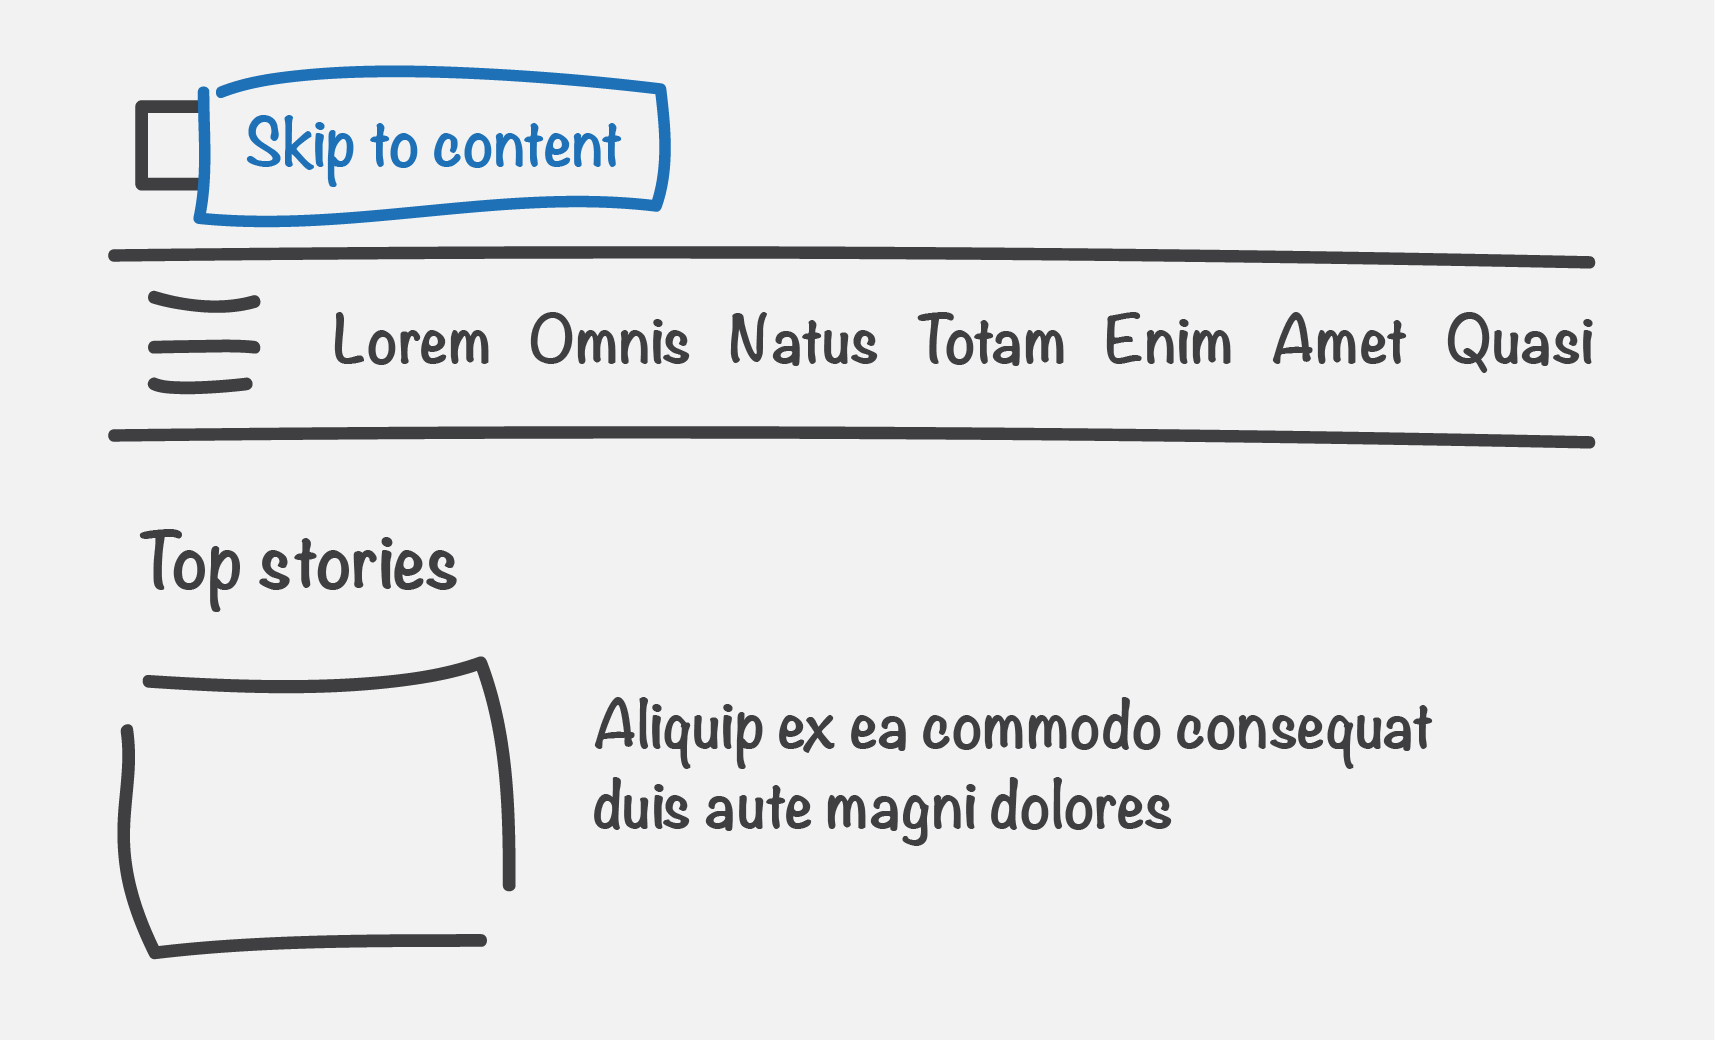 Skip to content link highlighted on a banner component